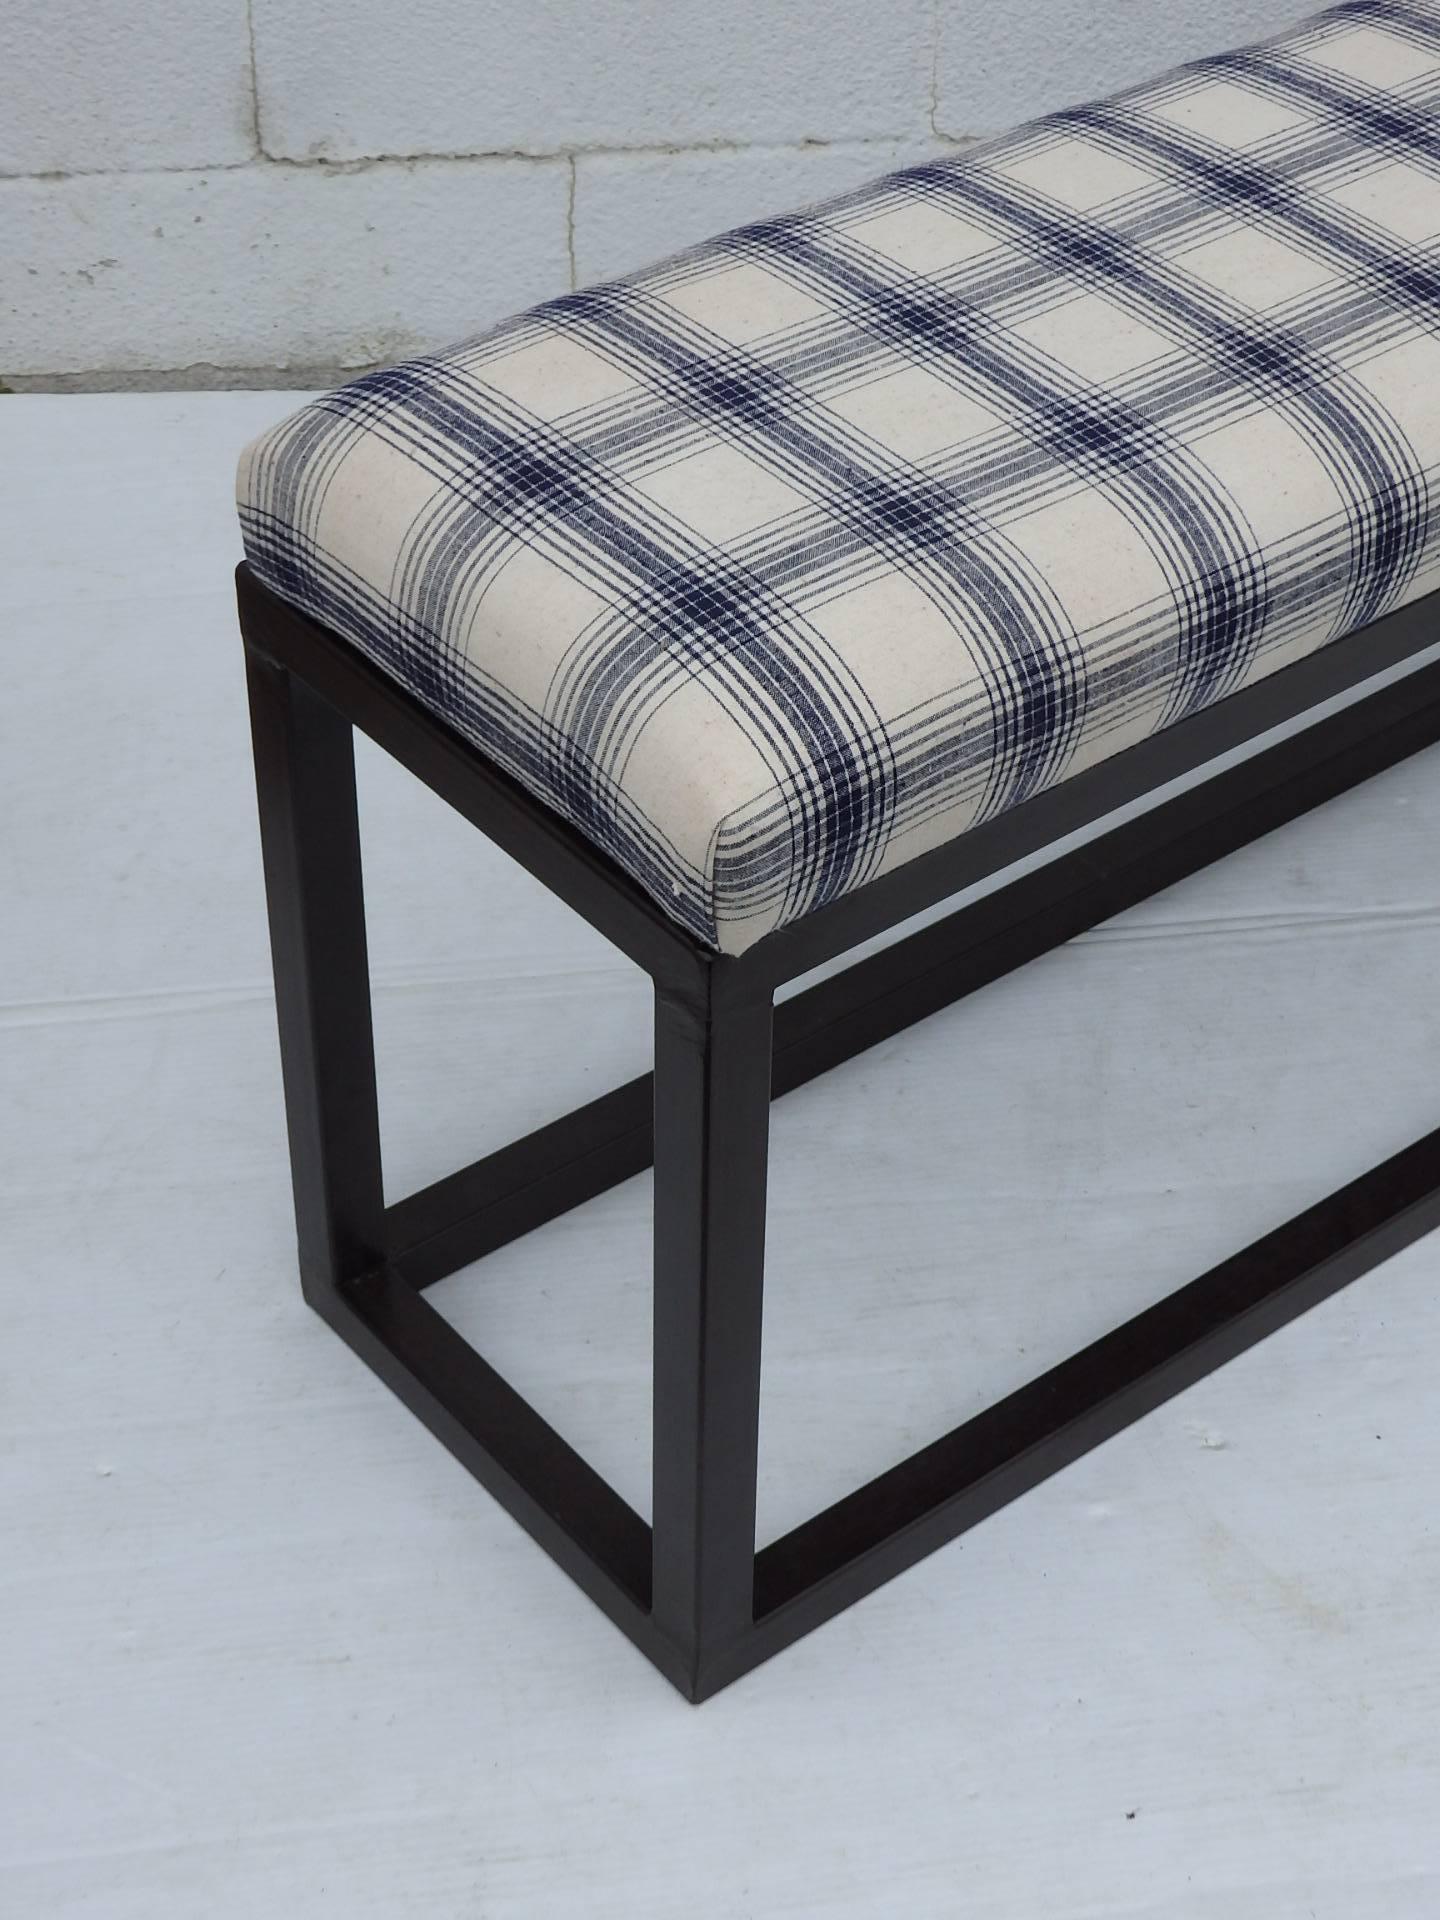 Long narrow bench with iron base and upholstered seat with in French vintage check fabric.